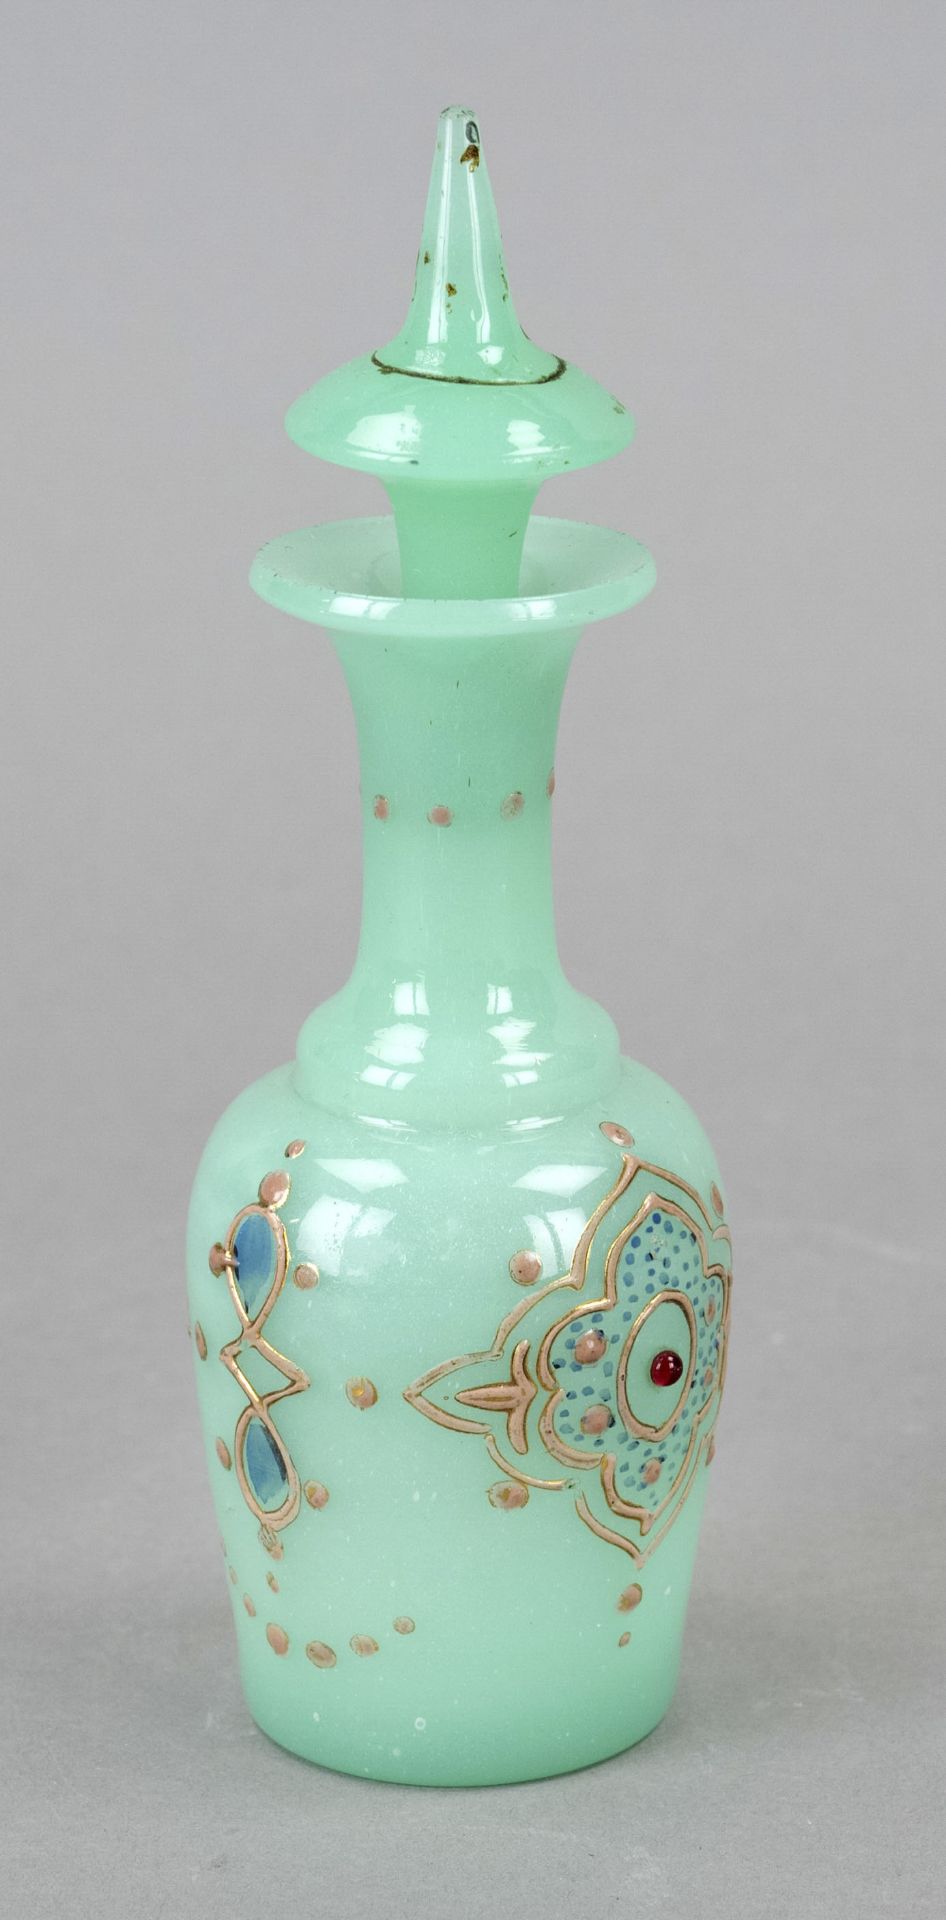 Flacon, late 19th century, round stand, slightly conical body, slender neck, cone stopper, turquoise